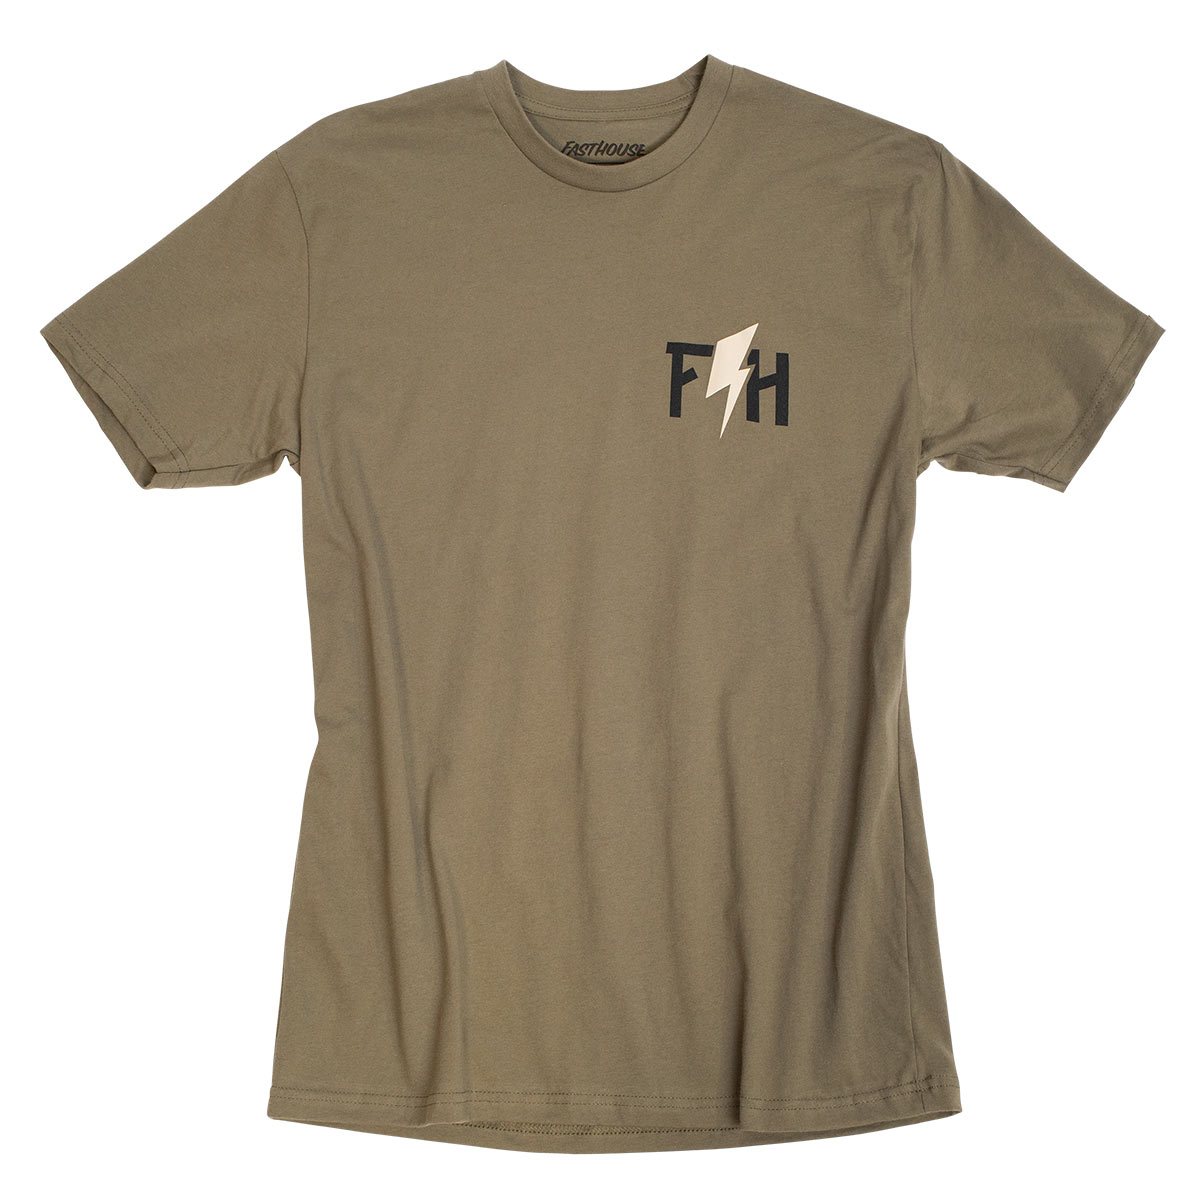 Fasthouse Logo Tee Shirt - Army Green - Size Med.